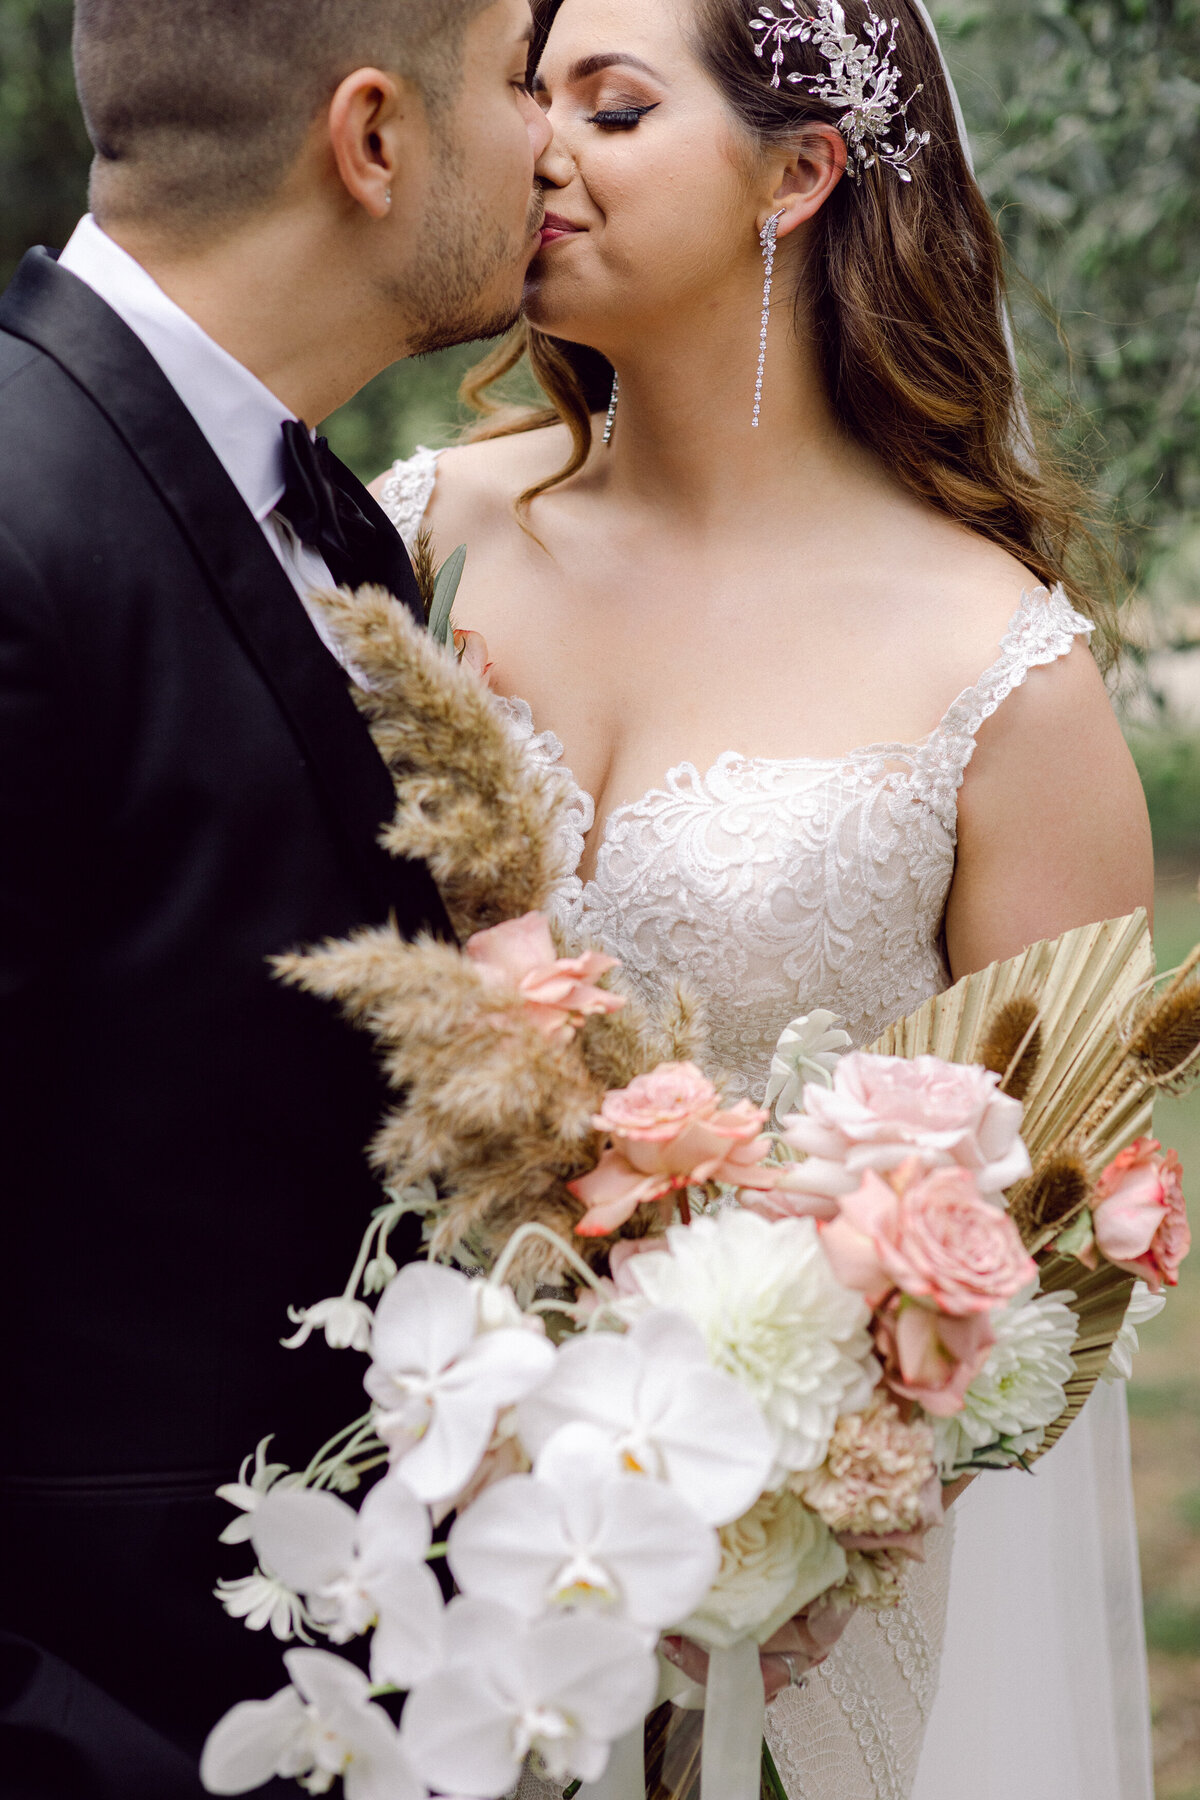 Bride and Groom's first kiss + wedding bouquet